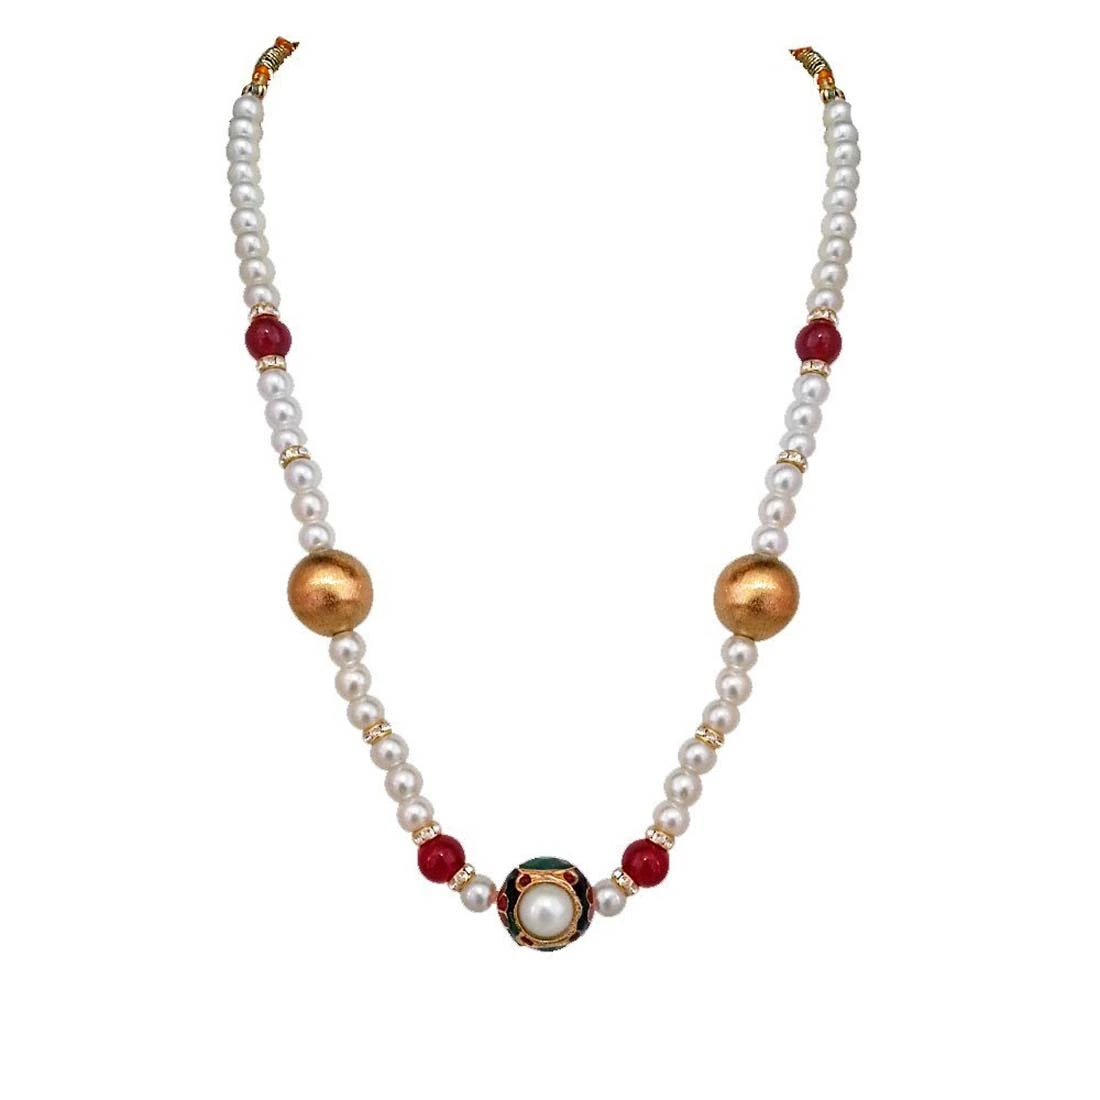 Exotic - Kundan Ball, Shell Pearls & Red Coloured Stone Necklace (SN642)